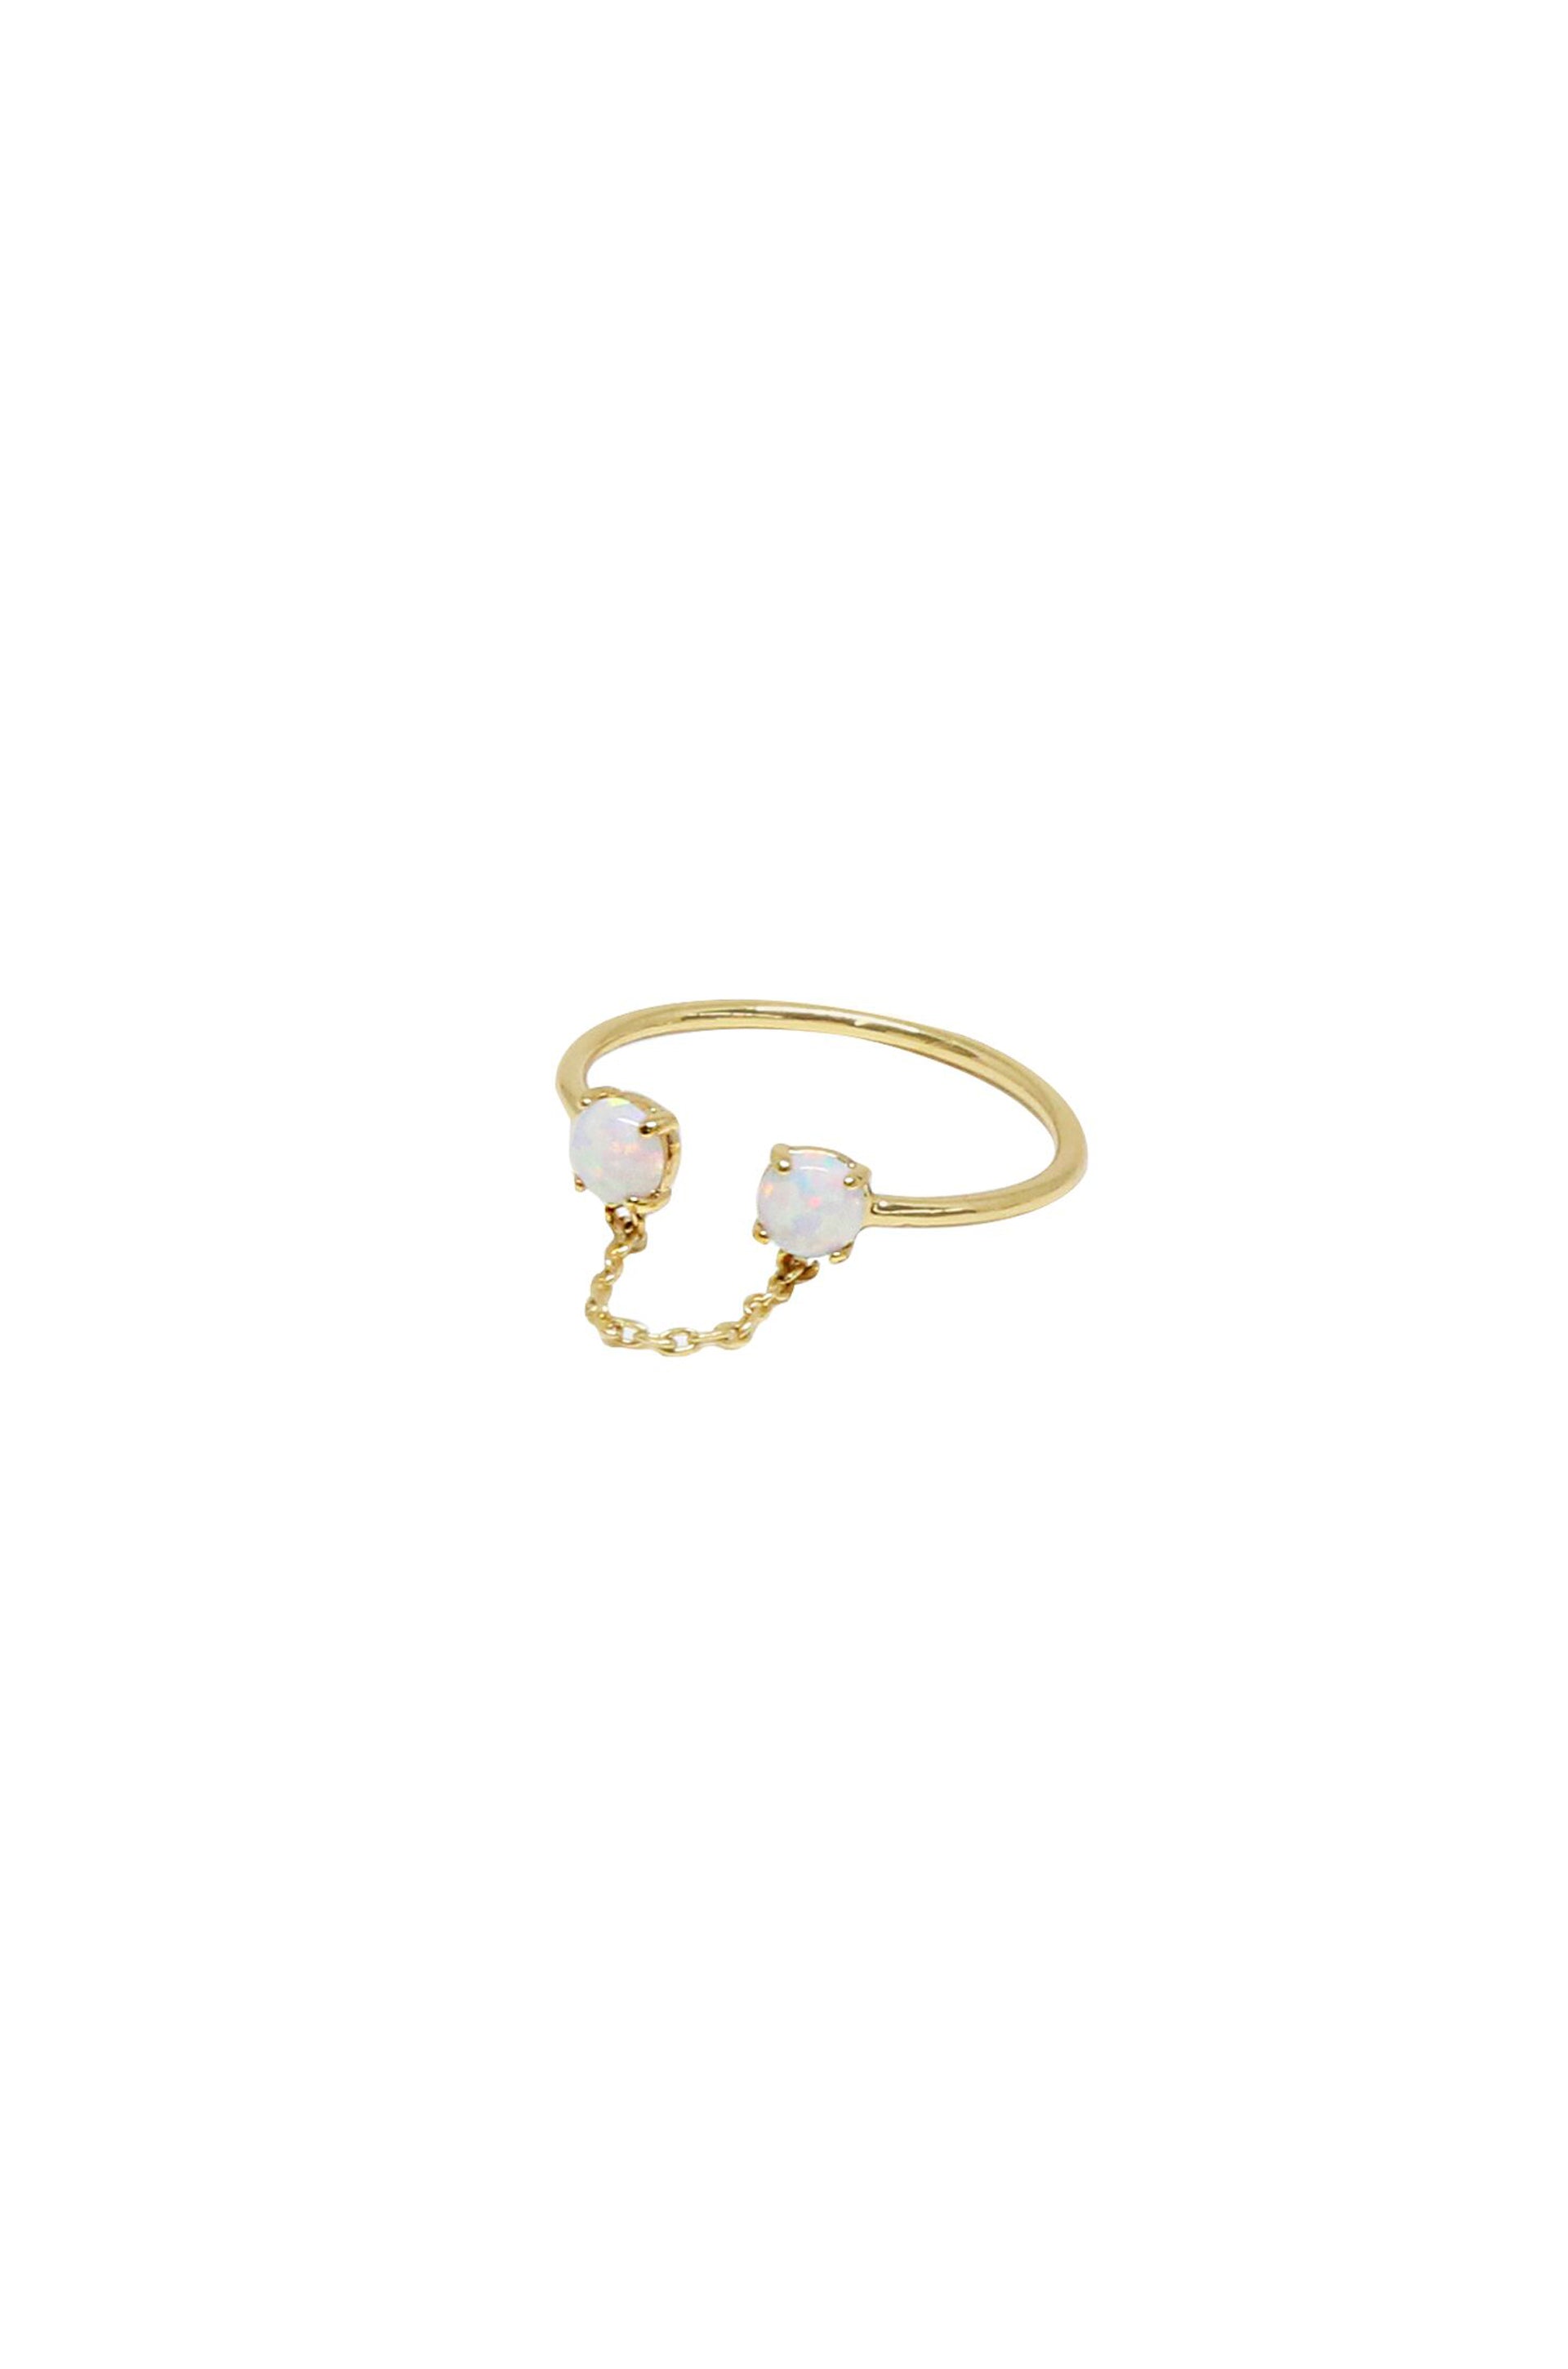 Adjustable 18k Gold Plated Ring with Chain & Kyocera Opal